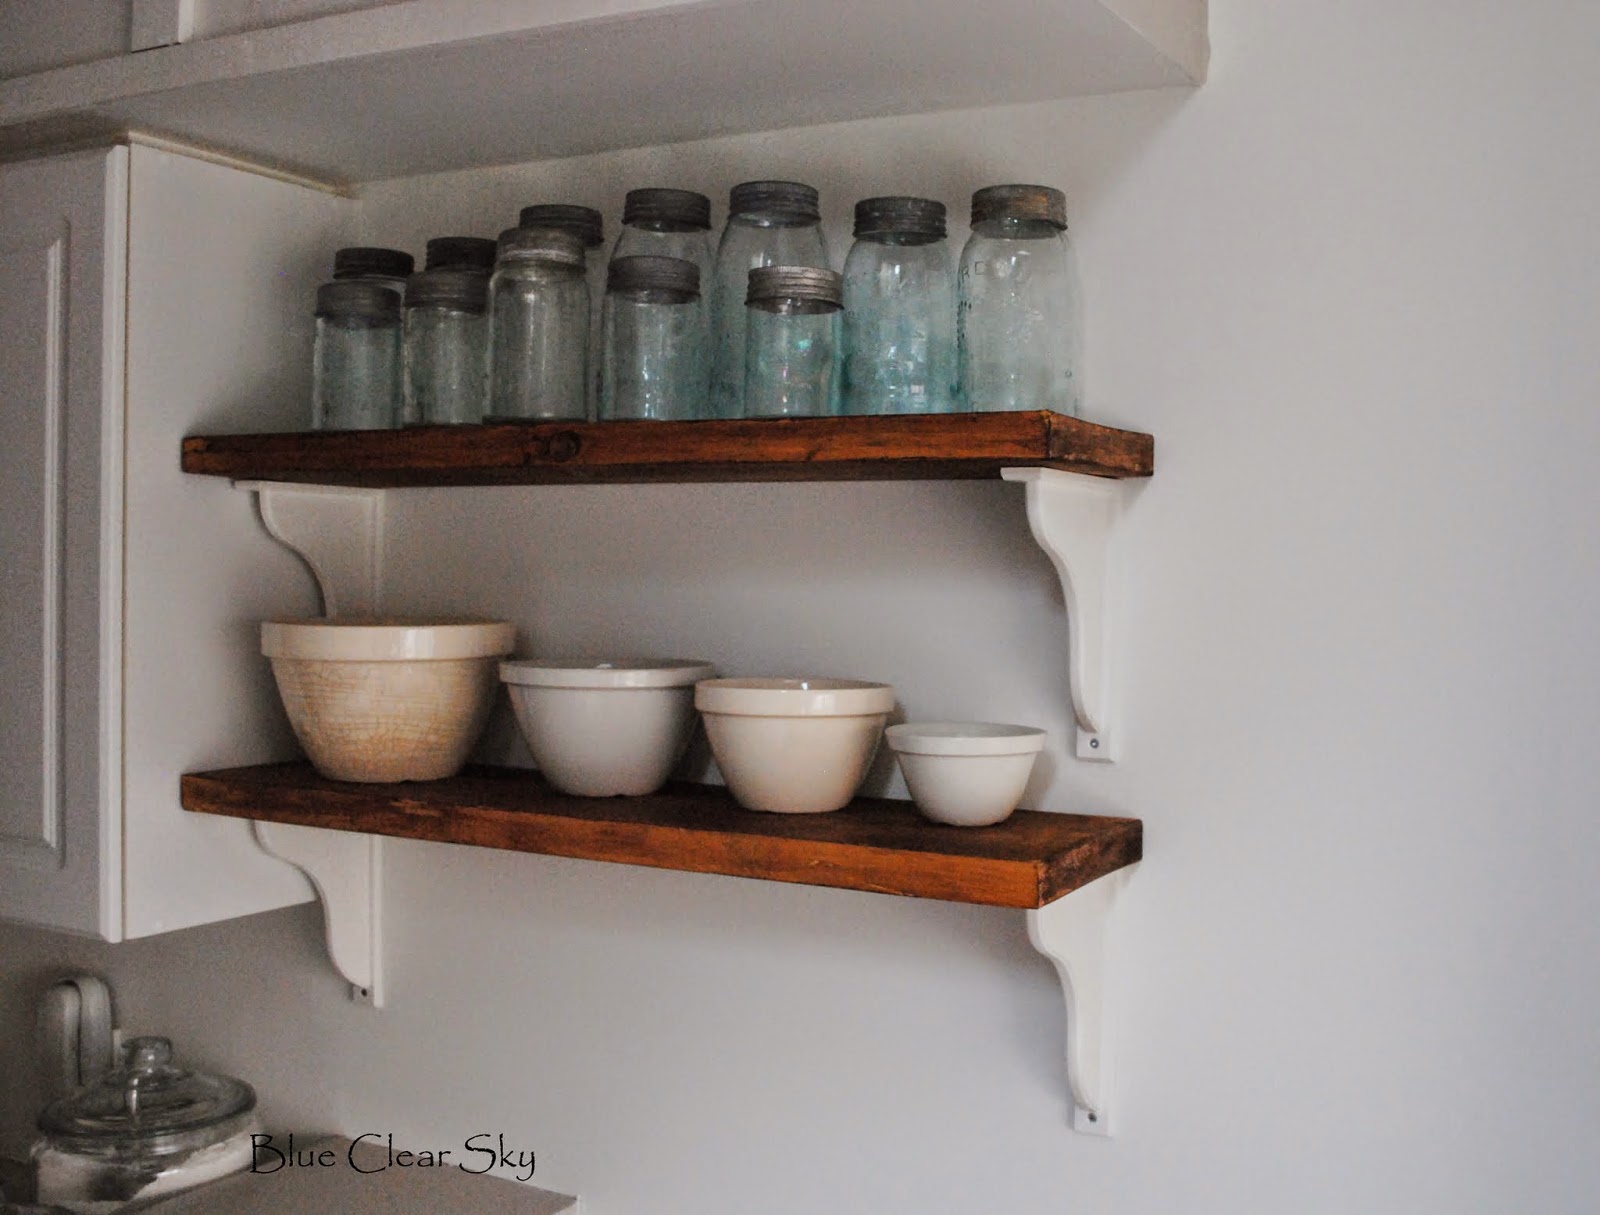 Rustic Maple: New Stained Shelves in Our Kitchen